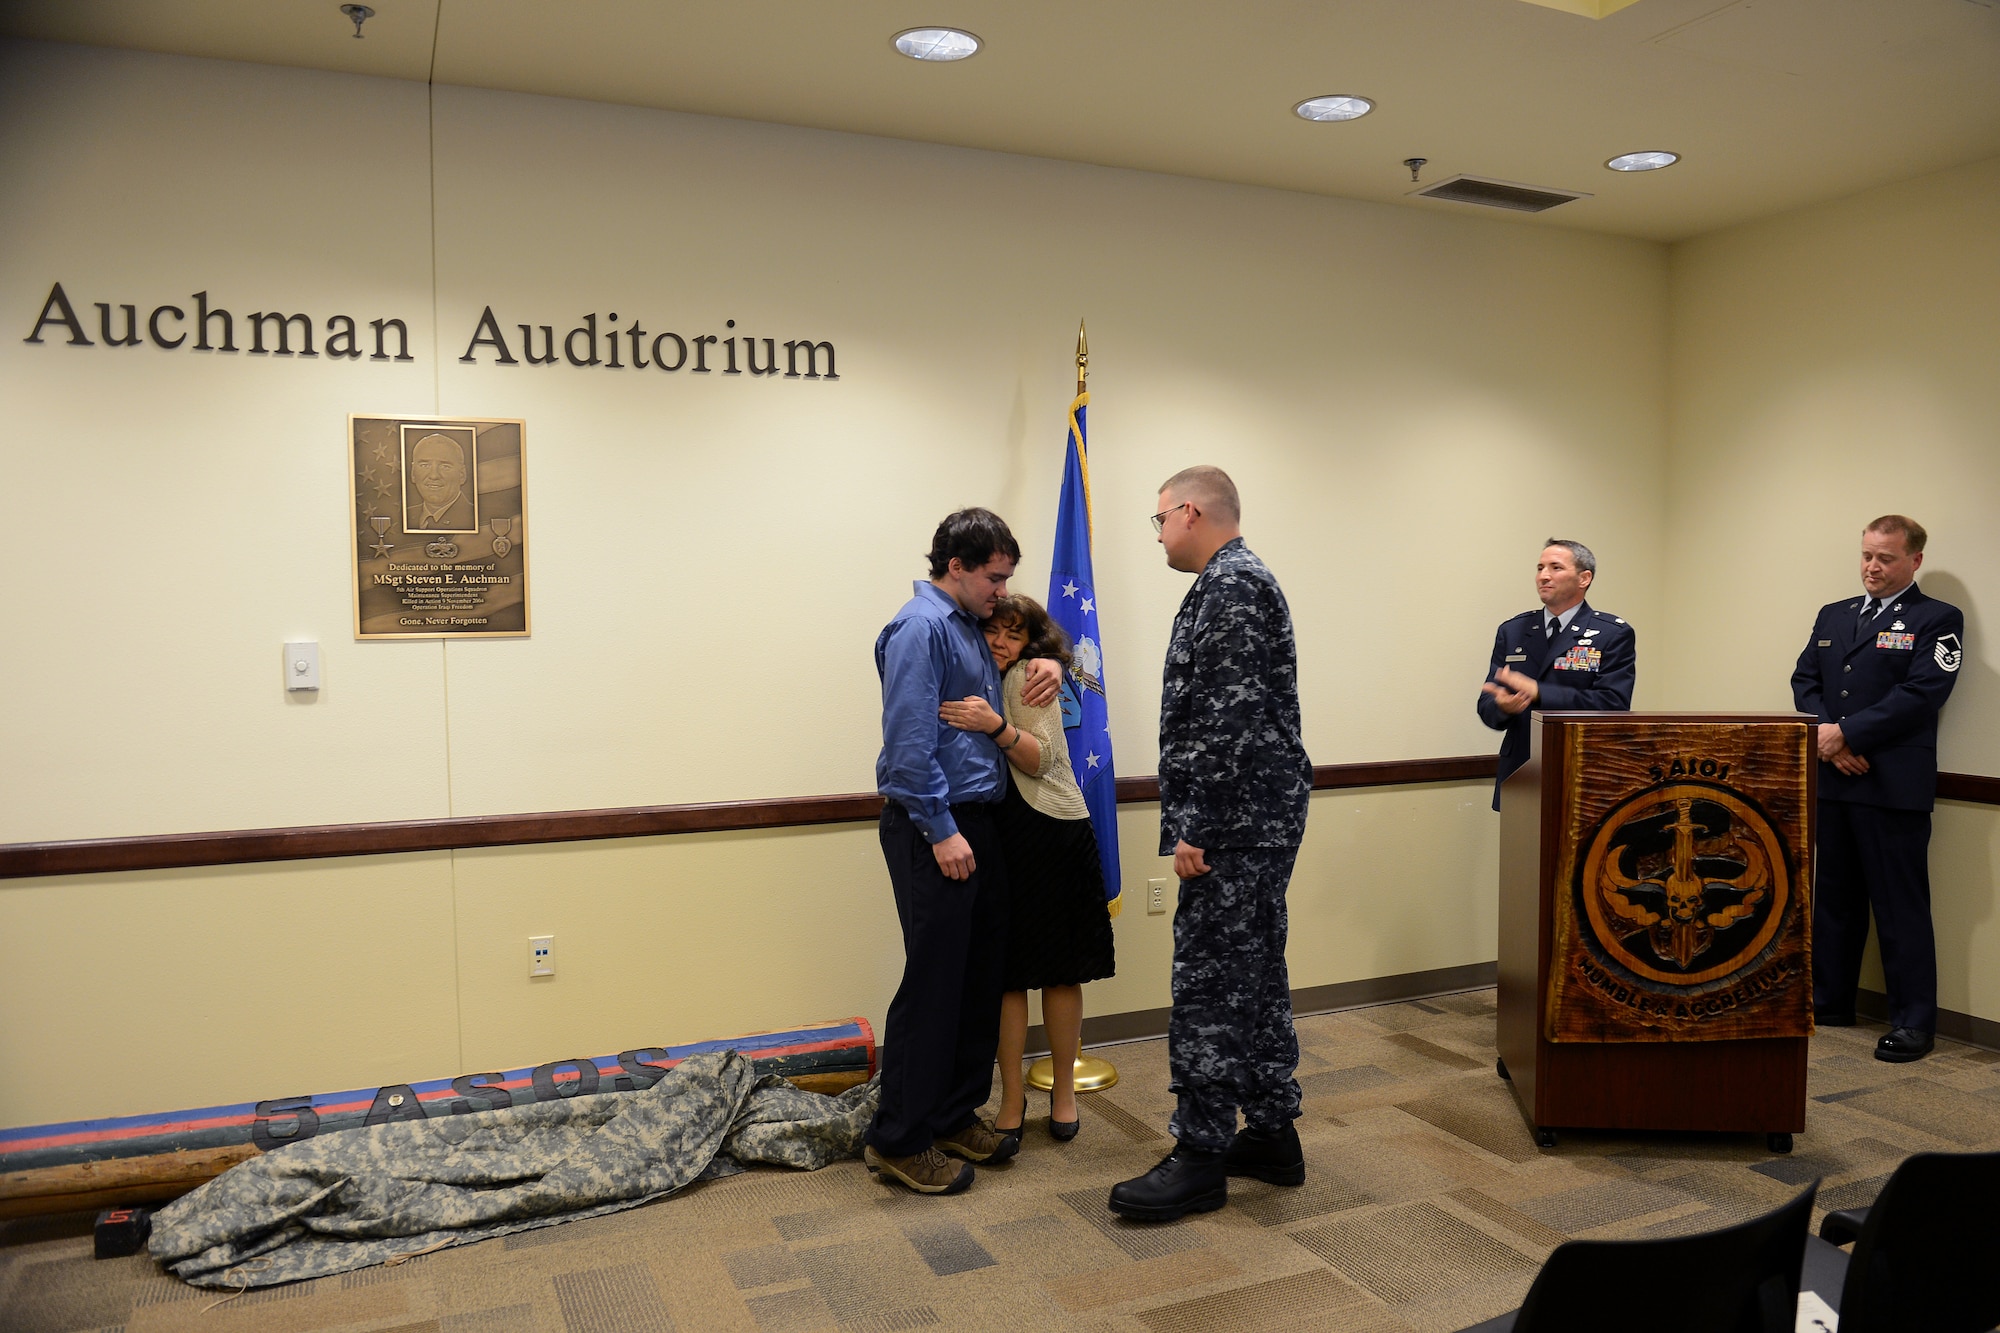 From left to right, Eric, Jennifer, and Brian Auchman, rejoice after uncovering the plaque Nov. 21, 2014, during the Auchman Auditorium Dedication Ceremony at Joint Base Lewis-McChord, Wash. The Auchman Auditorium serves as a small token of remembrance for Master Sgt. Steven Auchman and his family’s sacrifice. (U.S. Air Force photo/Airman 1st Class Keoni Chavarria)